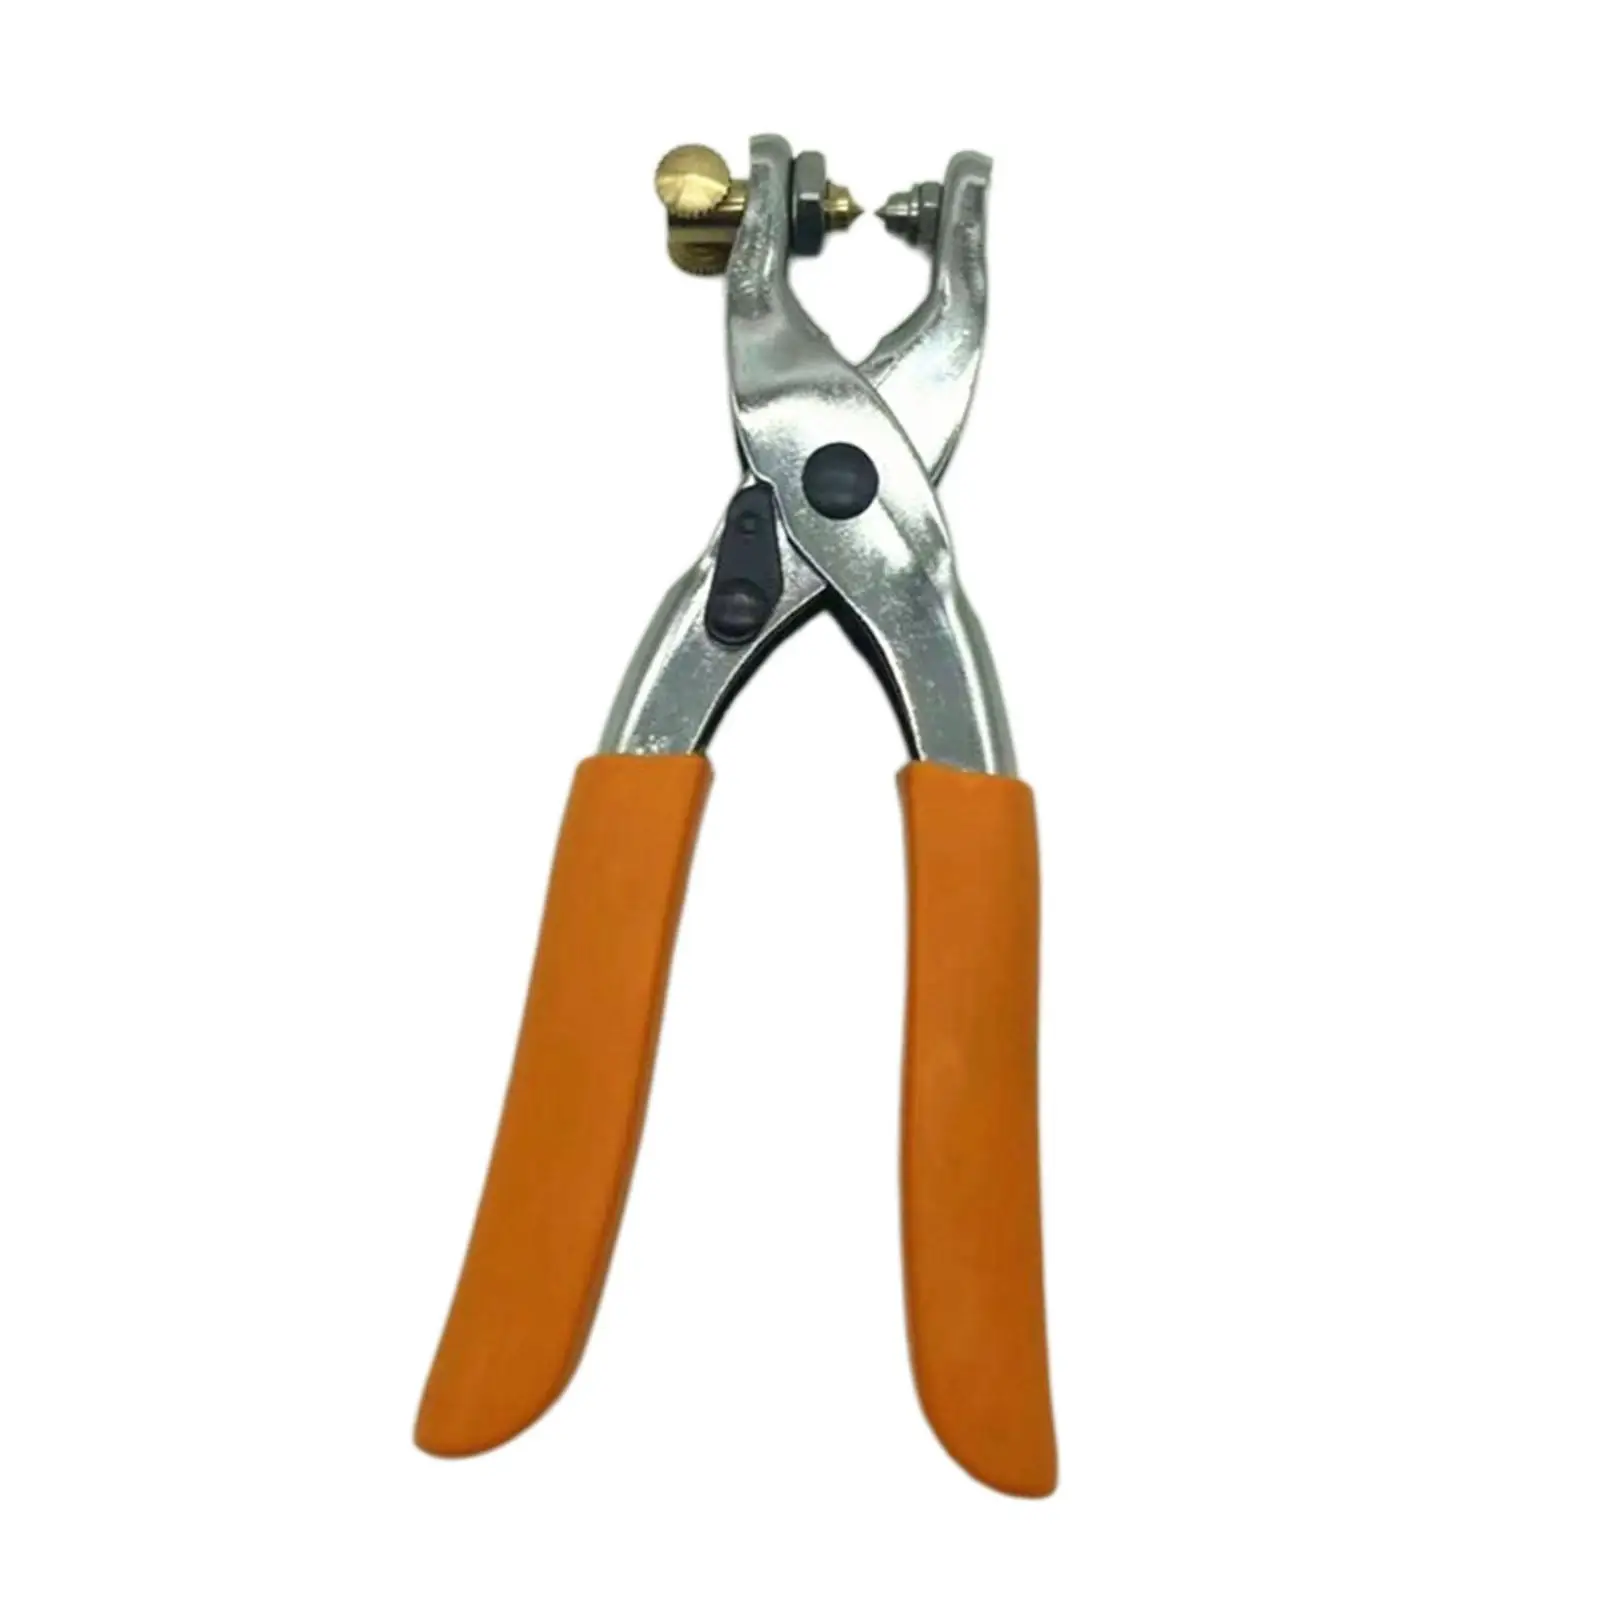 Durable Pliers for Badminton Racket String Clamp Outdoor Grommet Tool Grommet Clamp Threading Pincer Forceps Equipment